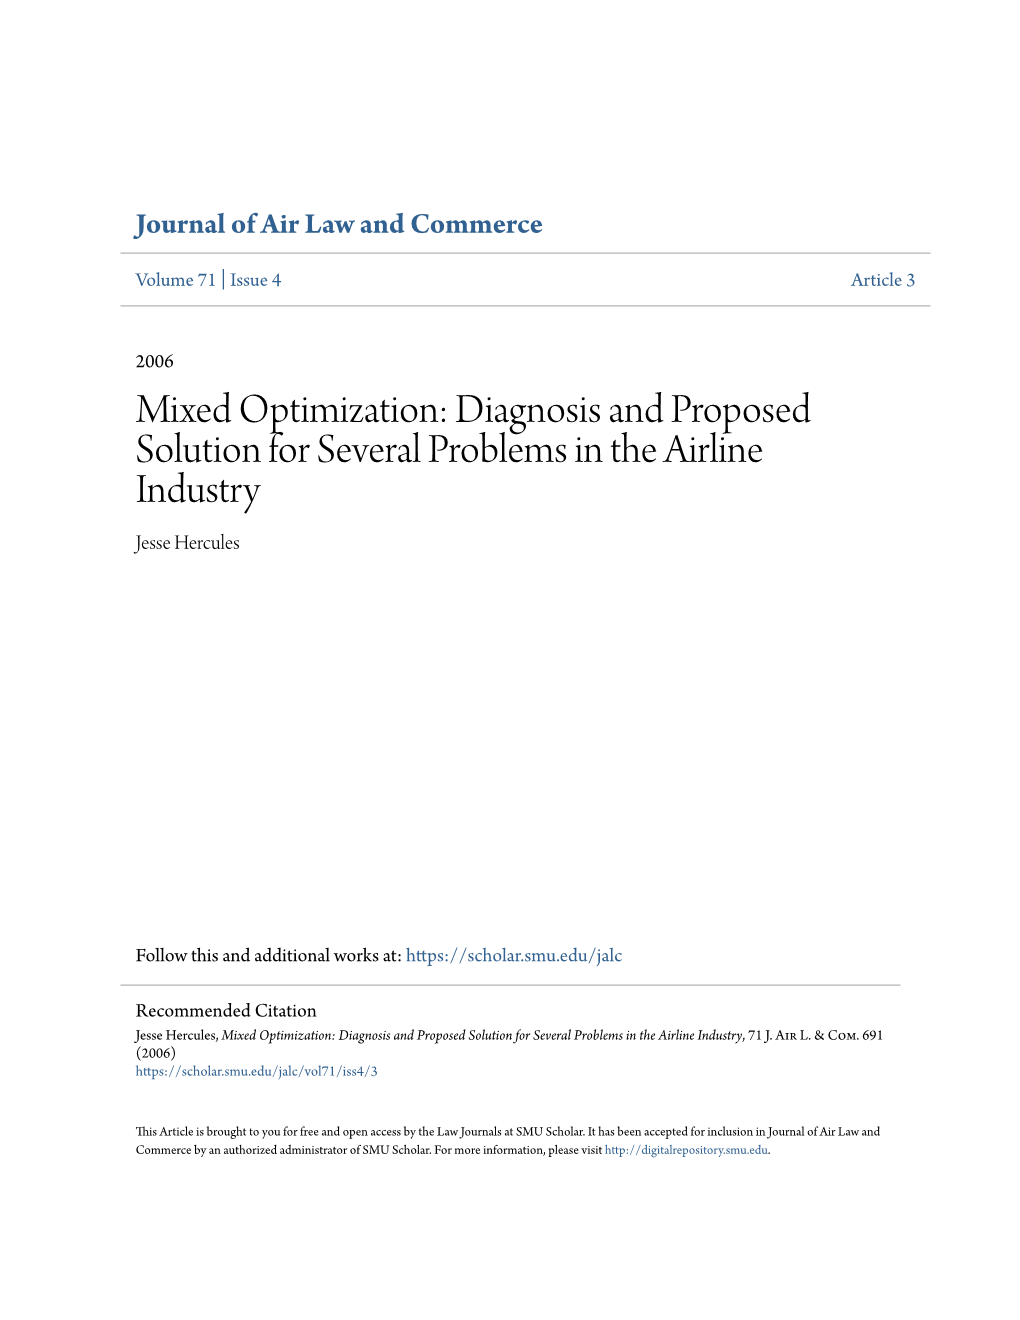 Diagnosis and Proposed Solution for Several Problems in the Airline Industry Jesse Hercules